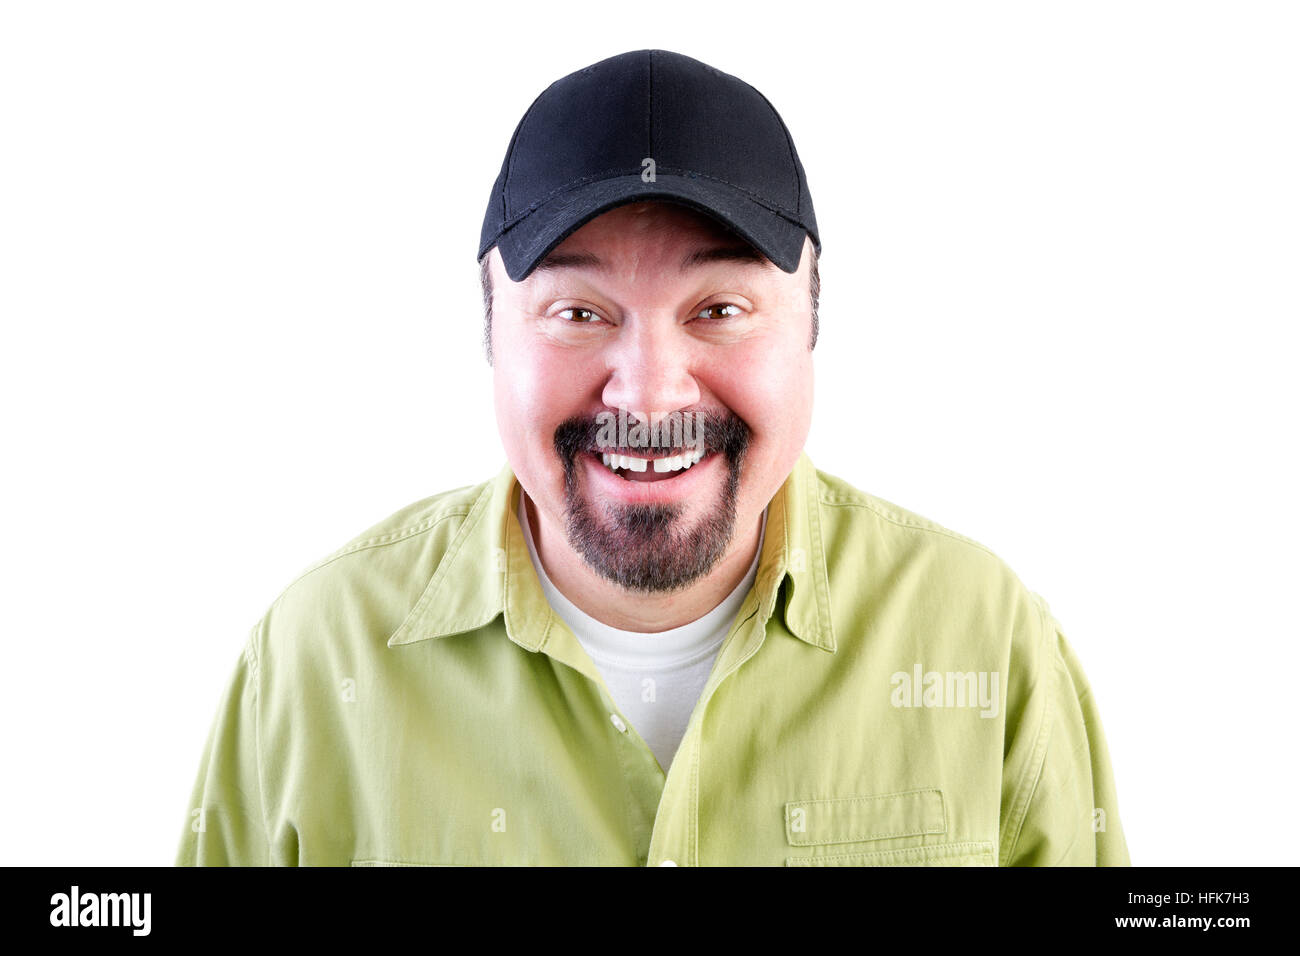 Head and shoulders portrait of grinning man in baseball cap, white background Stock Photo